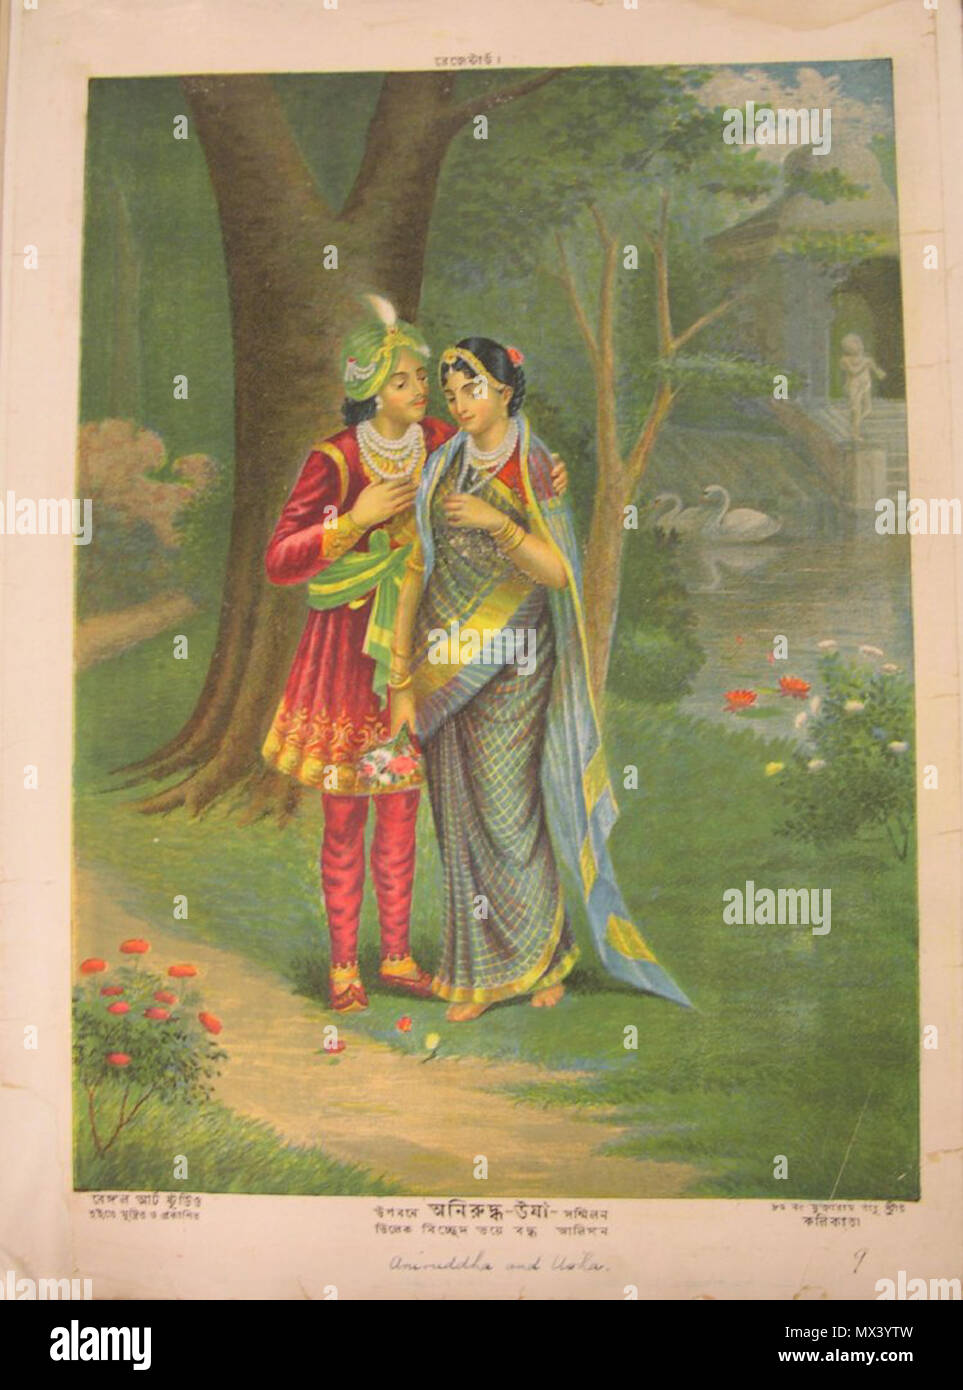 . English: Album of popular prints mounted on cloth pages. Colour lithograph, lettered, inscribed and numbered 9. Aniruddha and Usha stand in a forest with a western influenced landscape scene, complete with a pair of swans floating in a pond, in the background. Usha fell in love with a young man in a dream, and enlisted the help of an artist to draw his likeness and help her find him. That man was identified as Aniruddha, the grandson of Krishna, and the two were secretly married. circa 1895. Printed in Calcutta 47 Aniruddha and Usha stand in a forest with a western influenced landscape scene Stock Photo